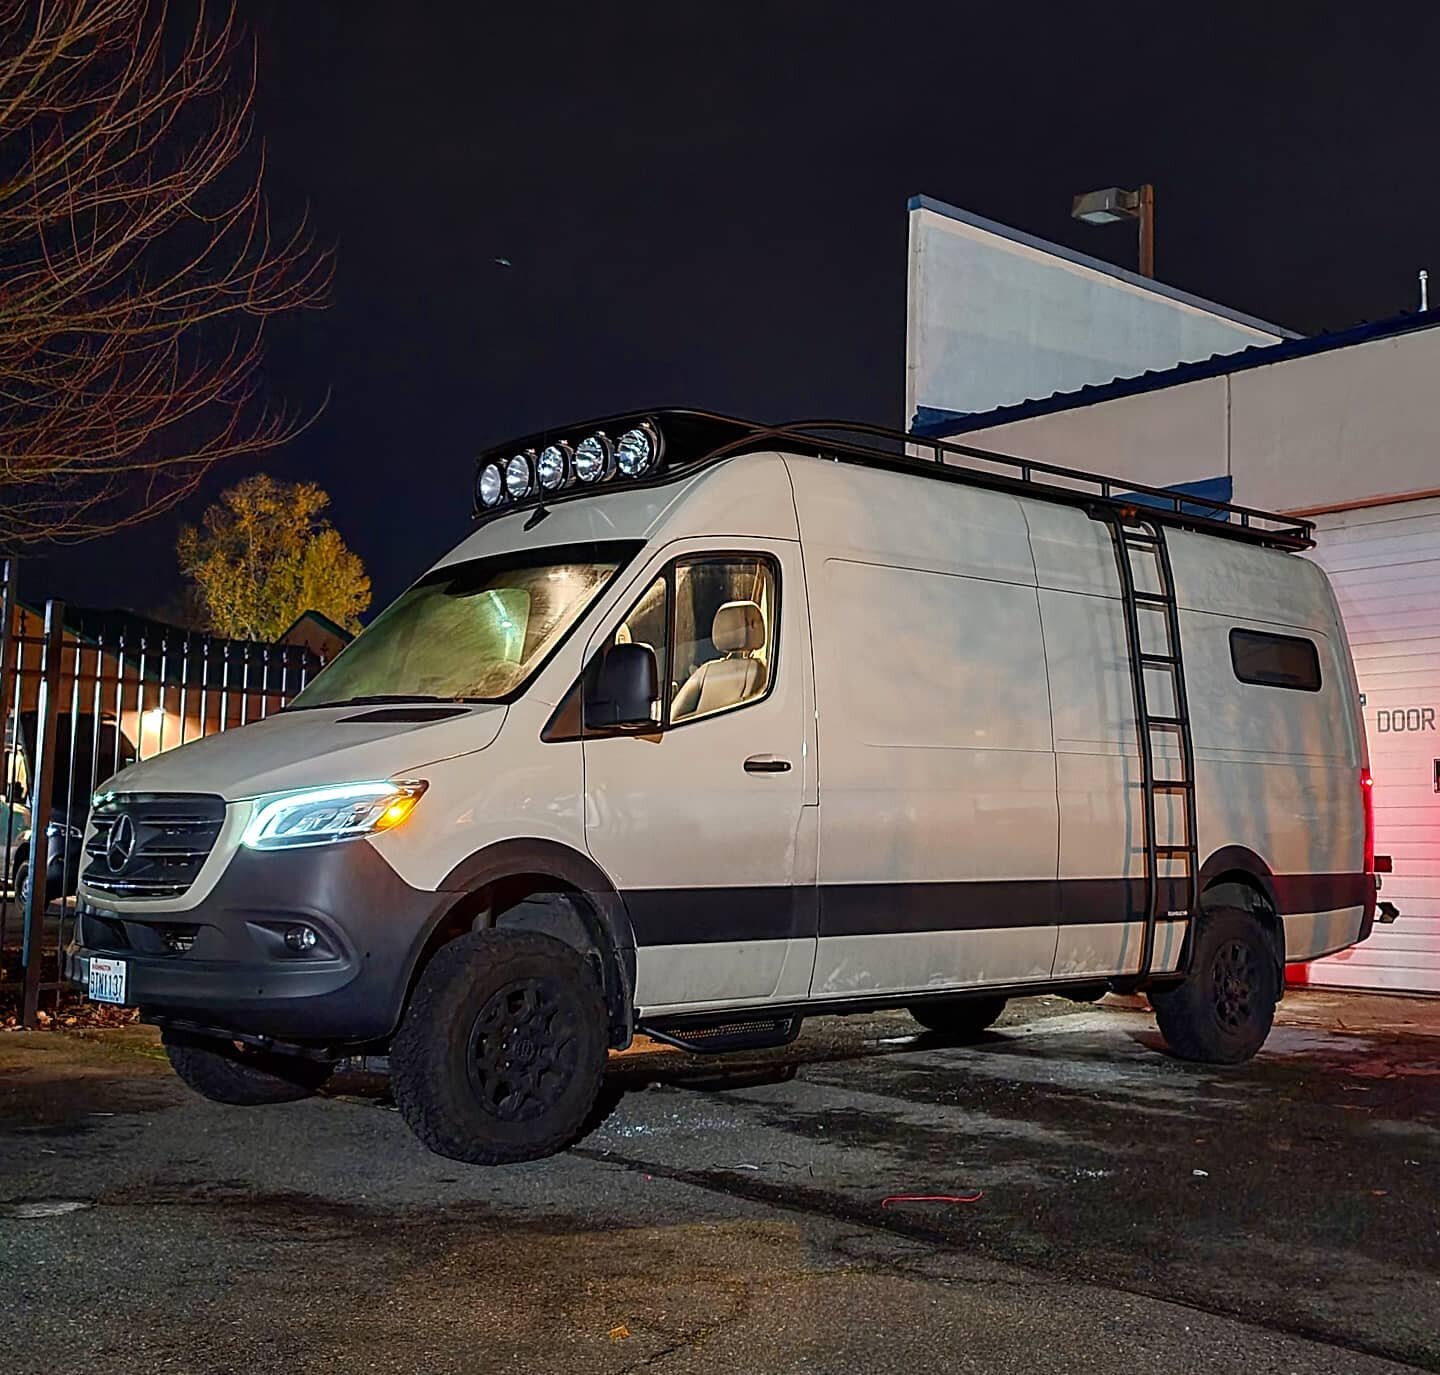 We put on a fresh exterior accessory package for this beautifully converted DIYer

Rack with lights
Side ladder
Side steps
Off-road lights

Everything you need to utilize the ins and outs of your van
.
.
.
.
.
.
.
.
#mammothvans #vanconversion #campe